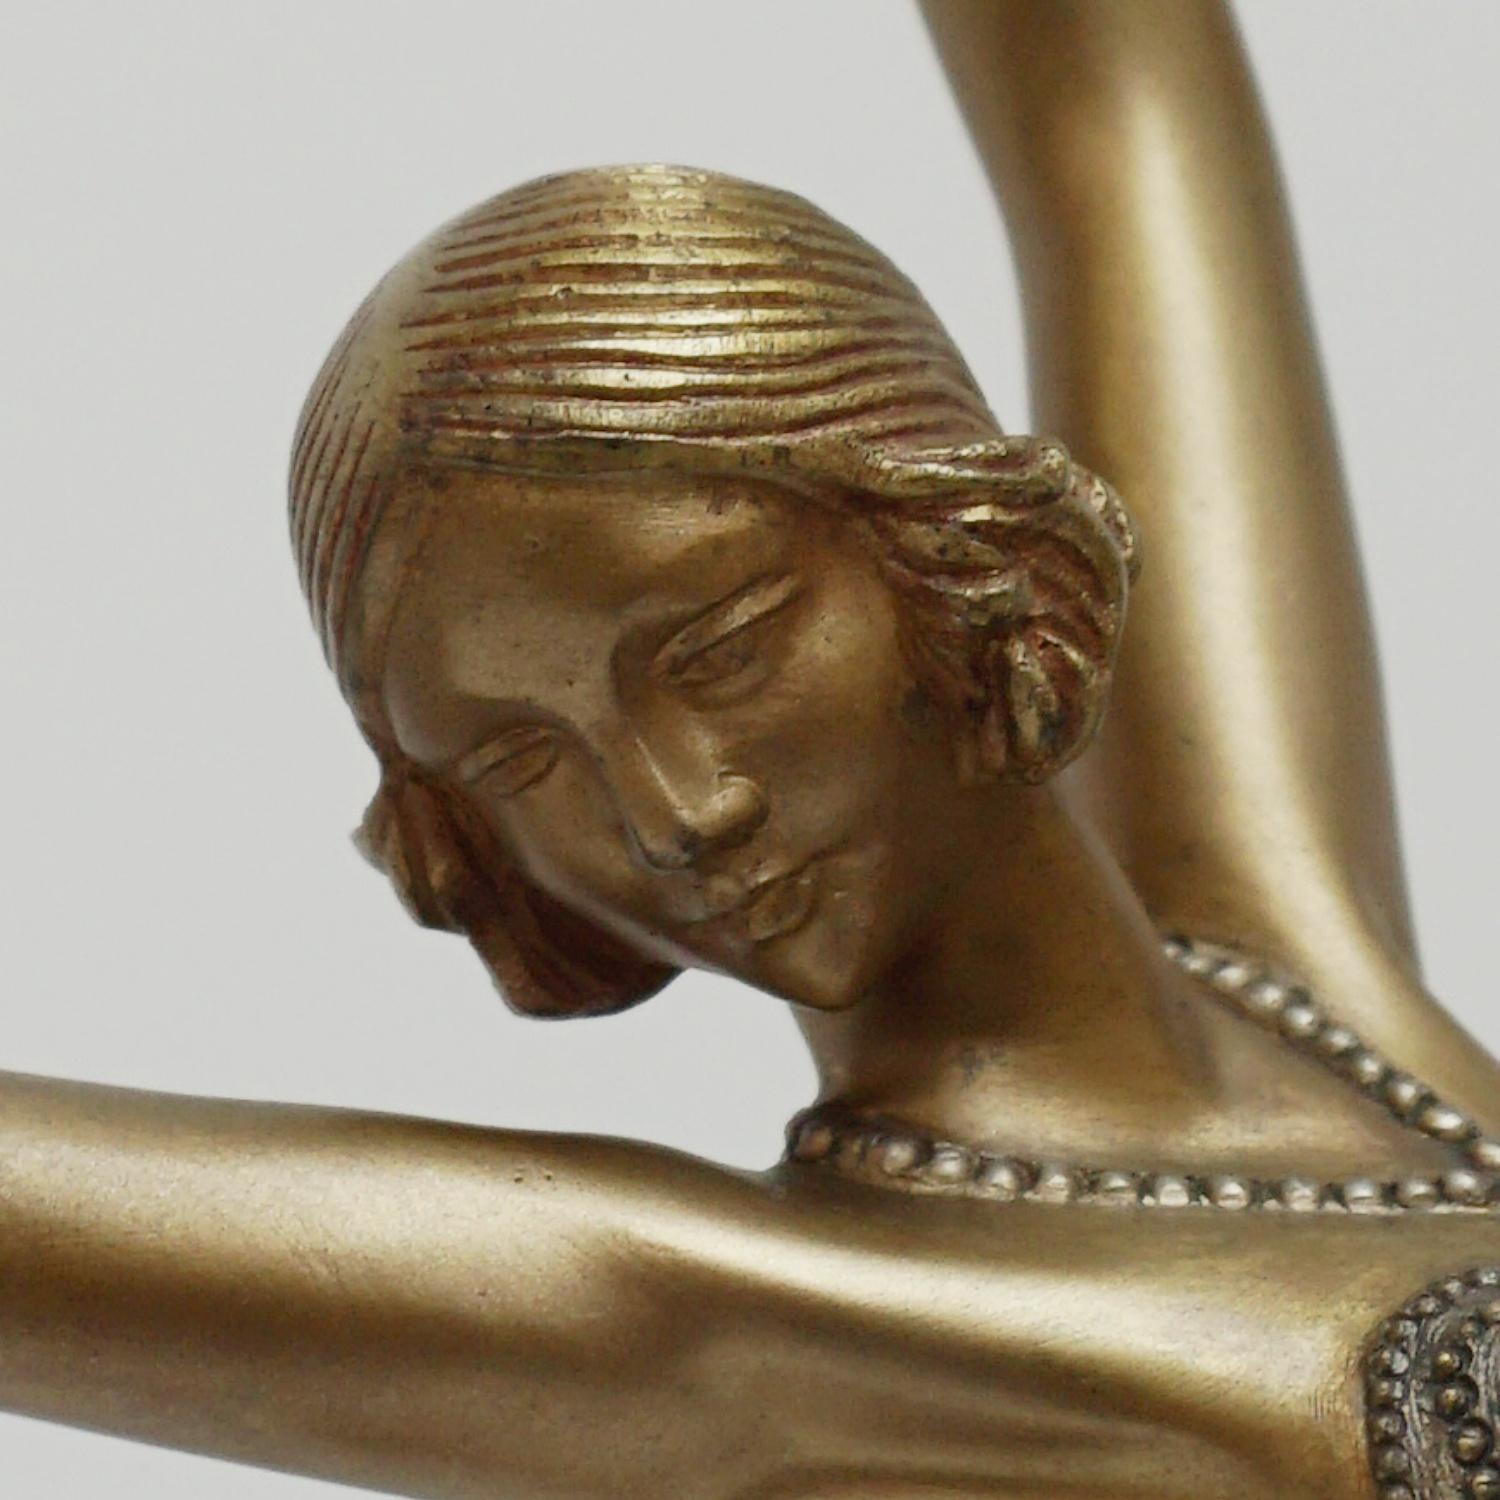 An Art Deco cold painted gilt bronze figure by Demetre Chiparus (1886-1947). An energetic dancer dressed in scantily clad theatrical costume with arms outstretched in a stylised pose. Excellent hand finished detail and Fine colour. Raised on a